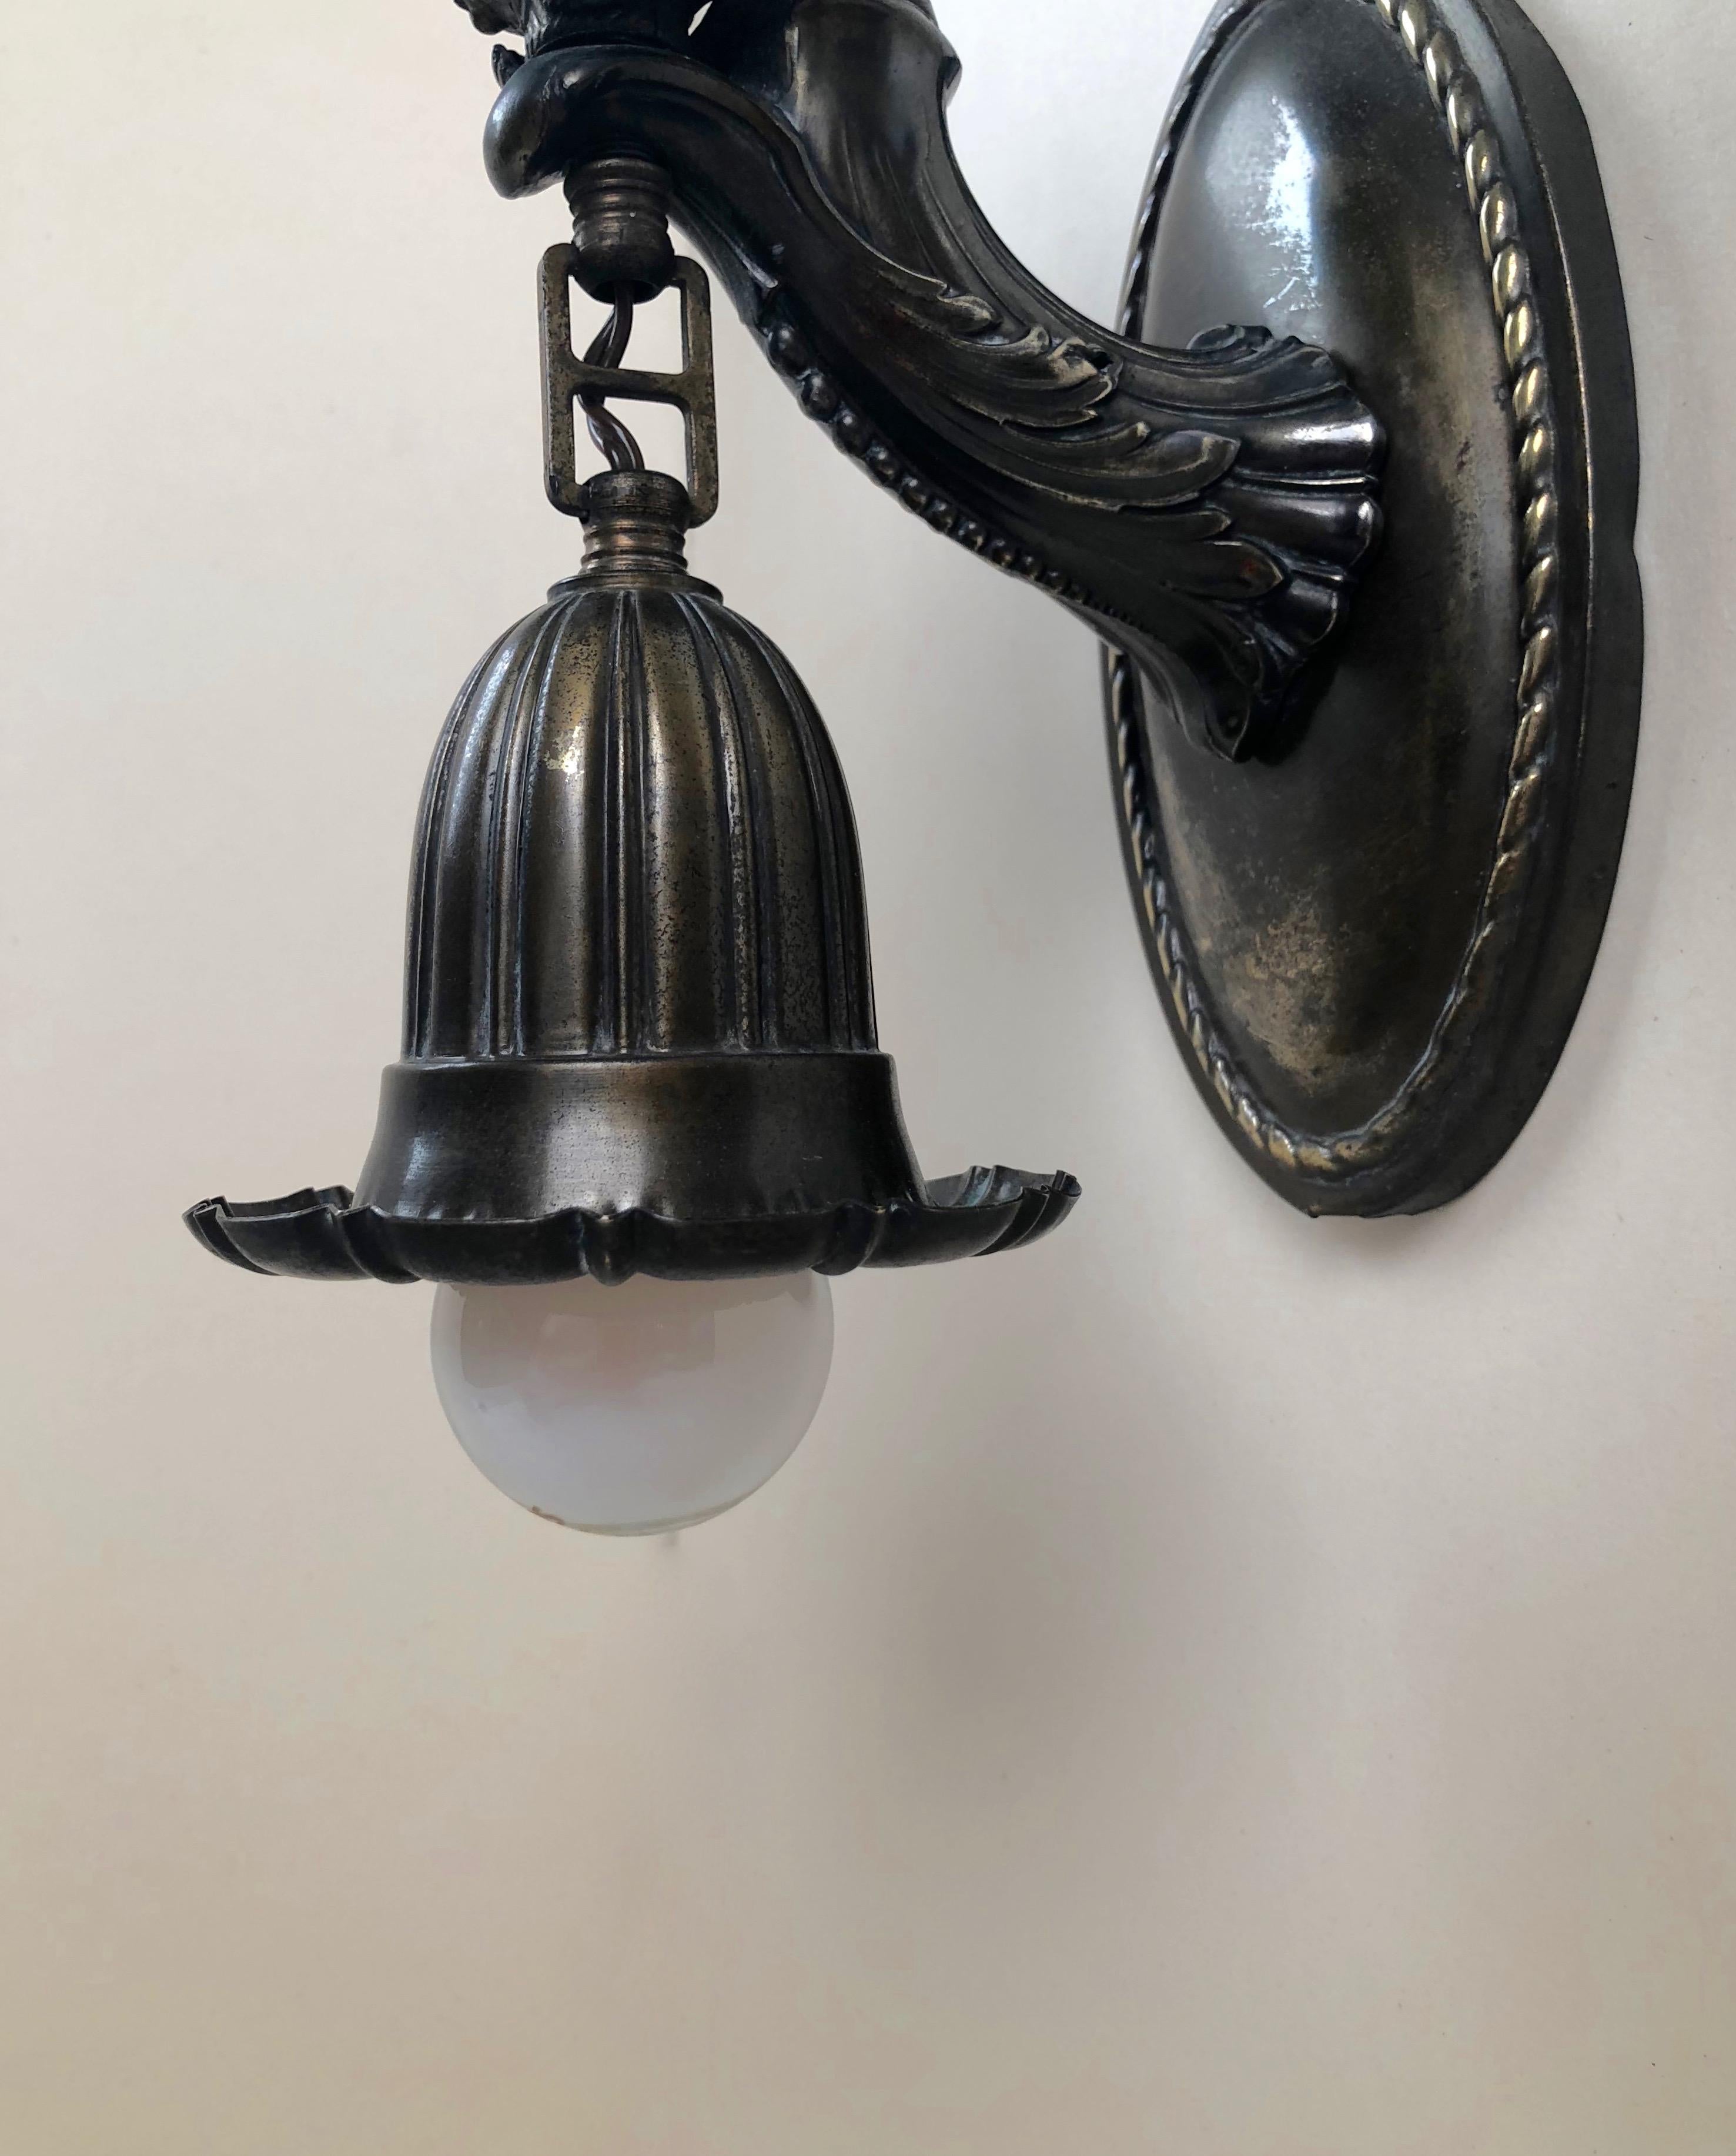 Austrian Jugendstil Bronze Wall Sconce with a Torso of a Women Holding a Bouquet For Sale 2